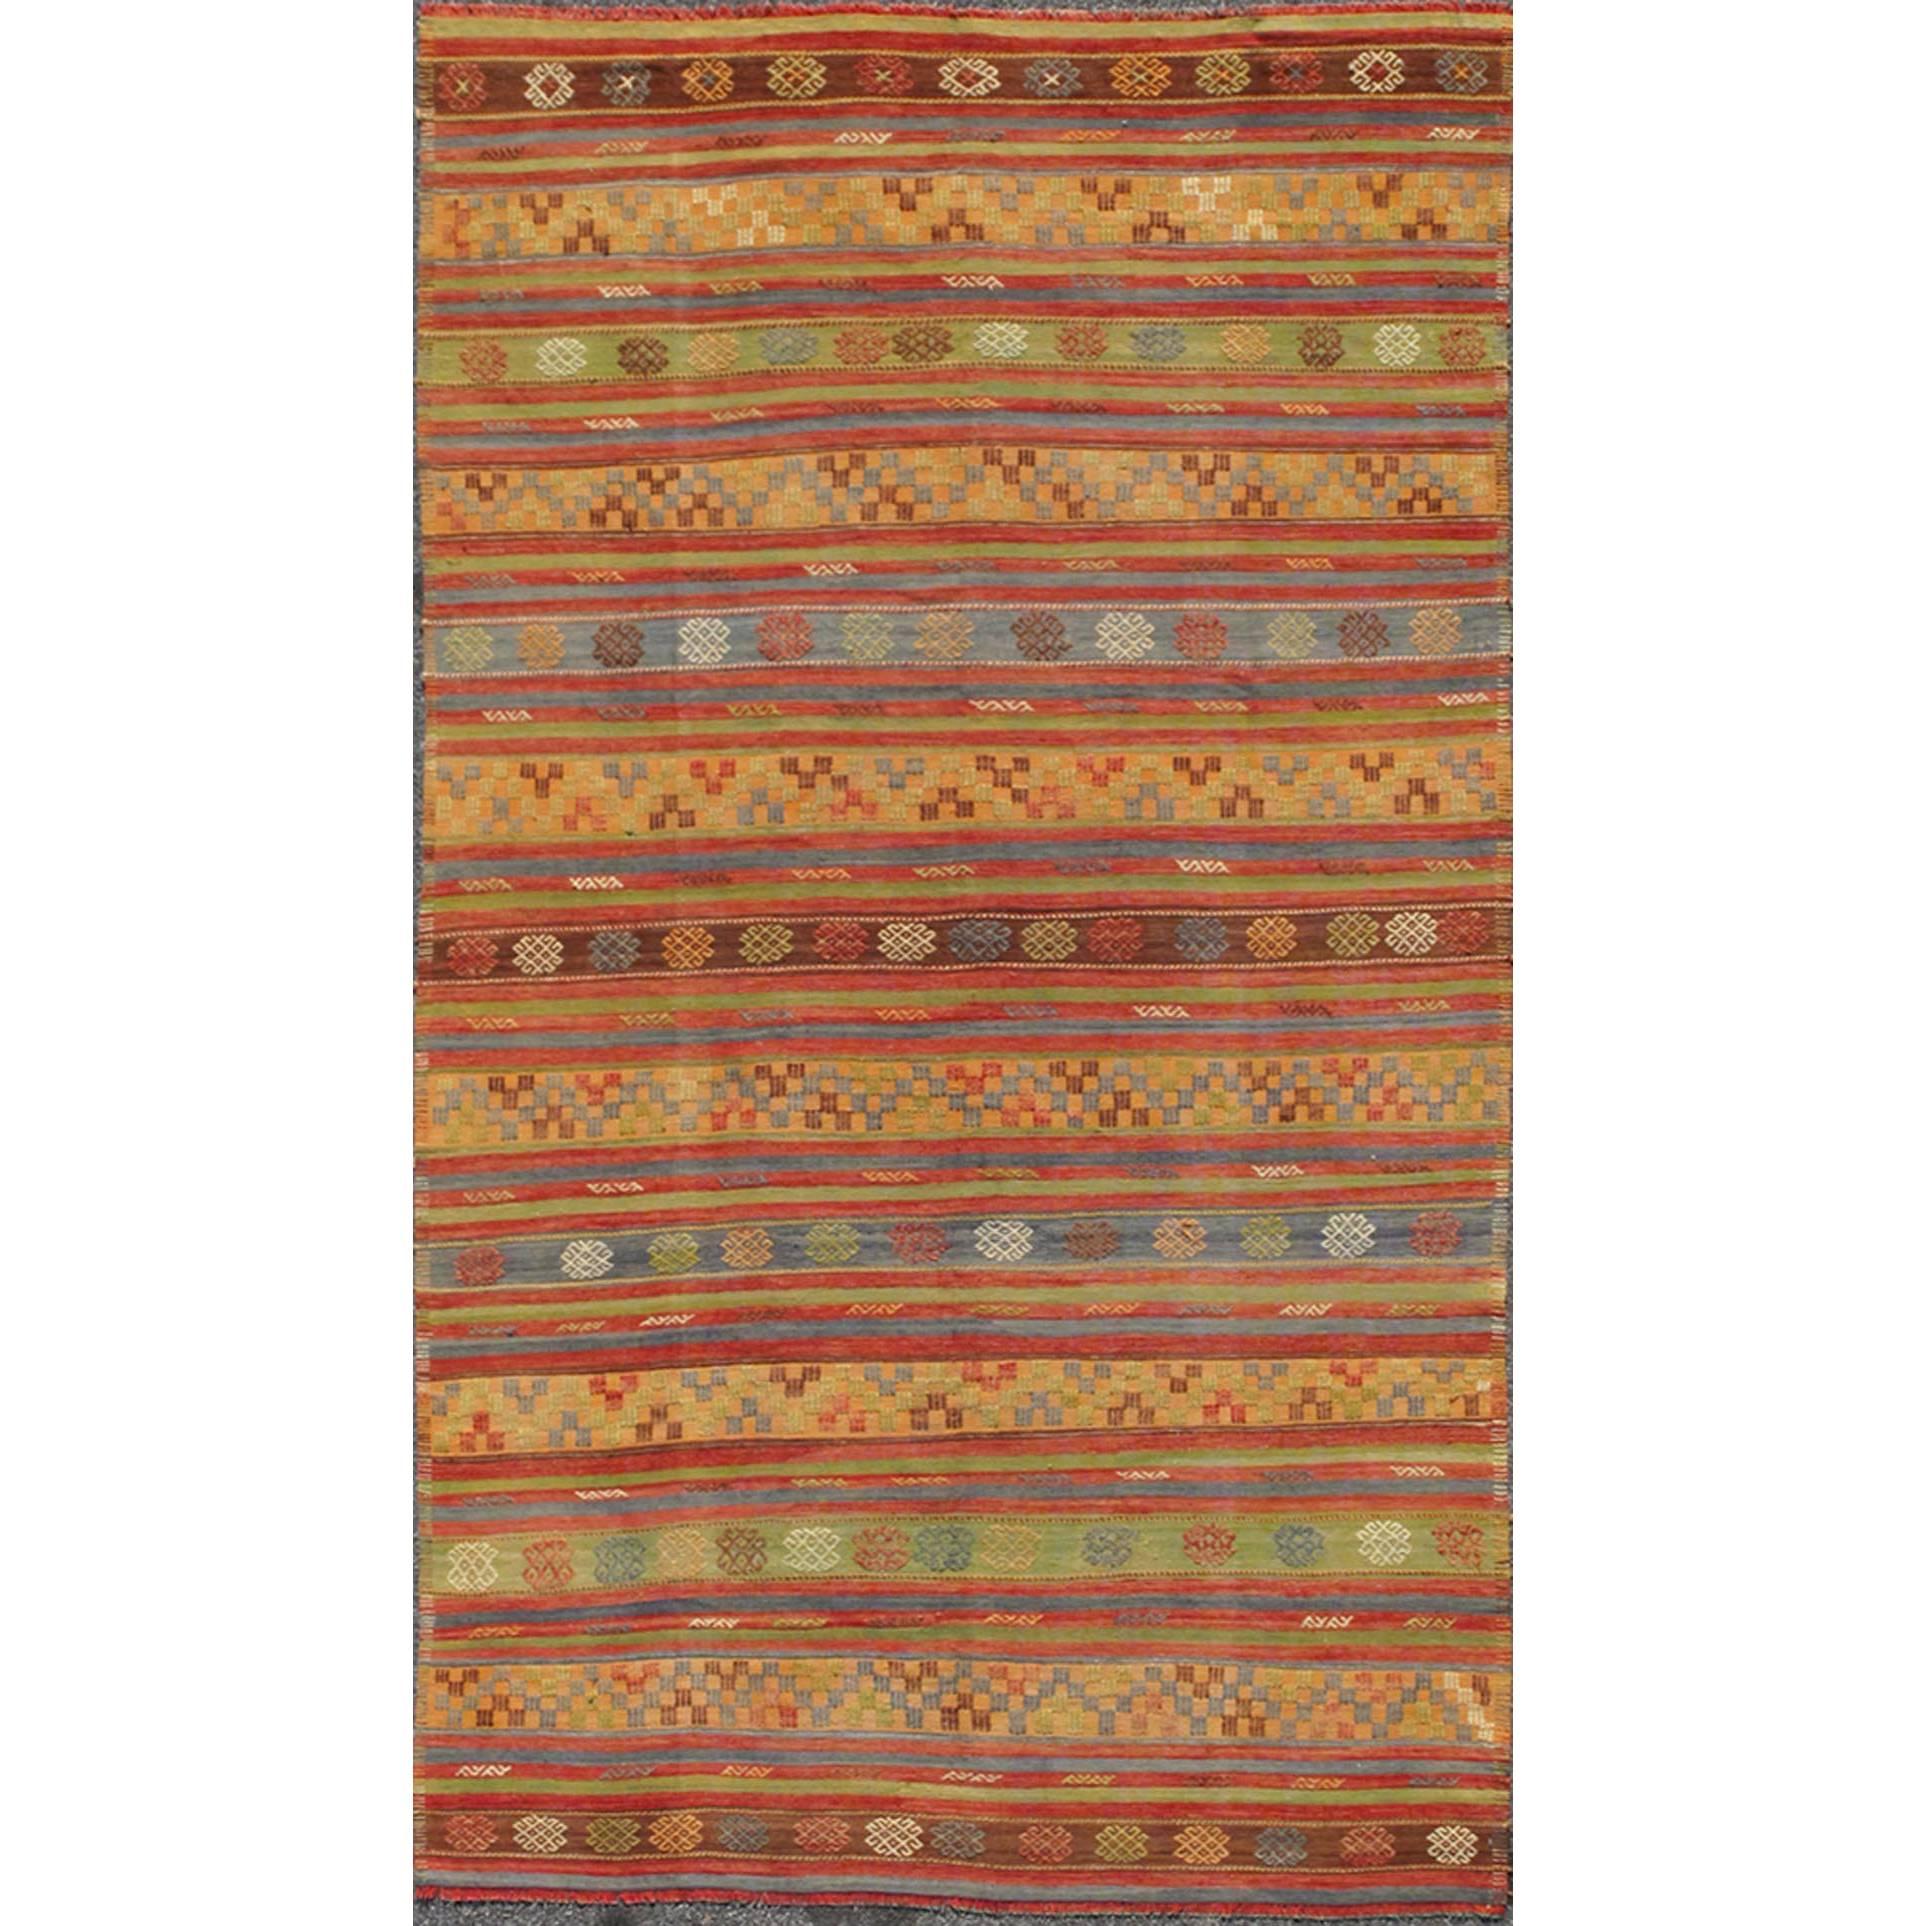 Multicolored Vintage Turkish Kilim Rug with Geometric Shapes and Stripes Design